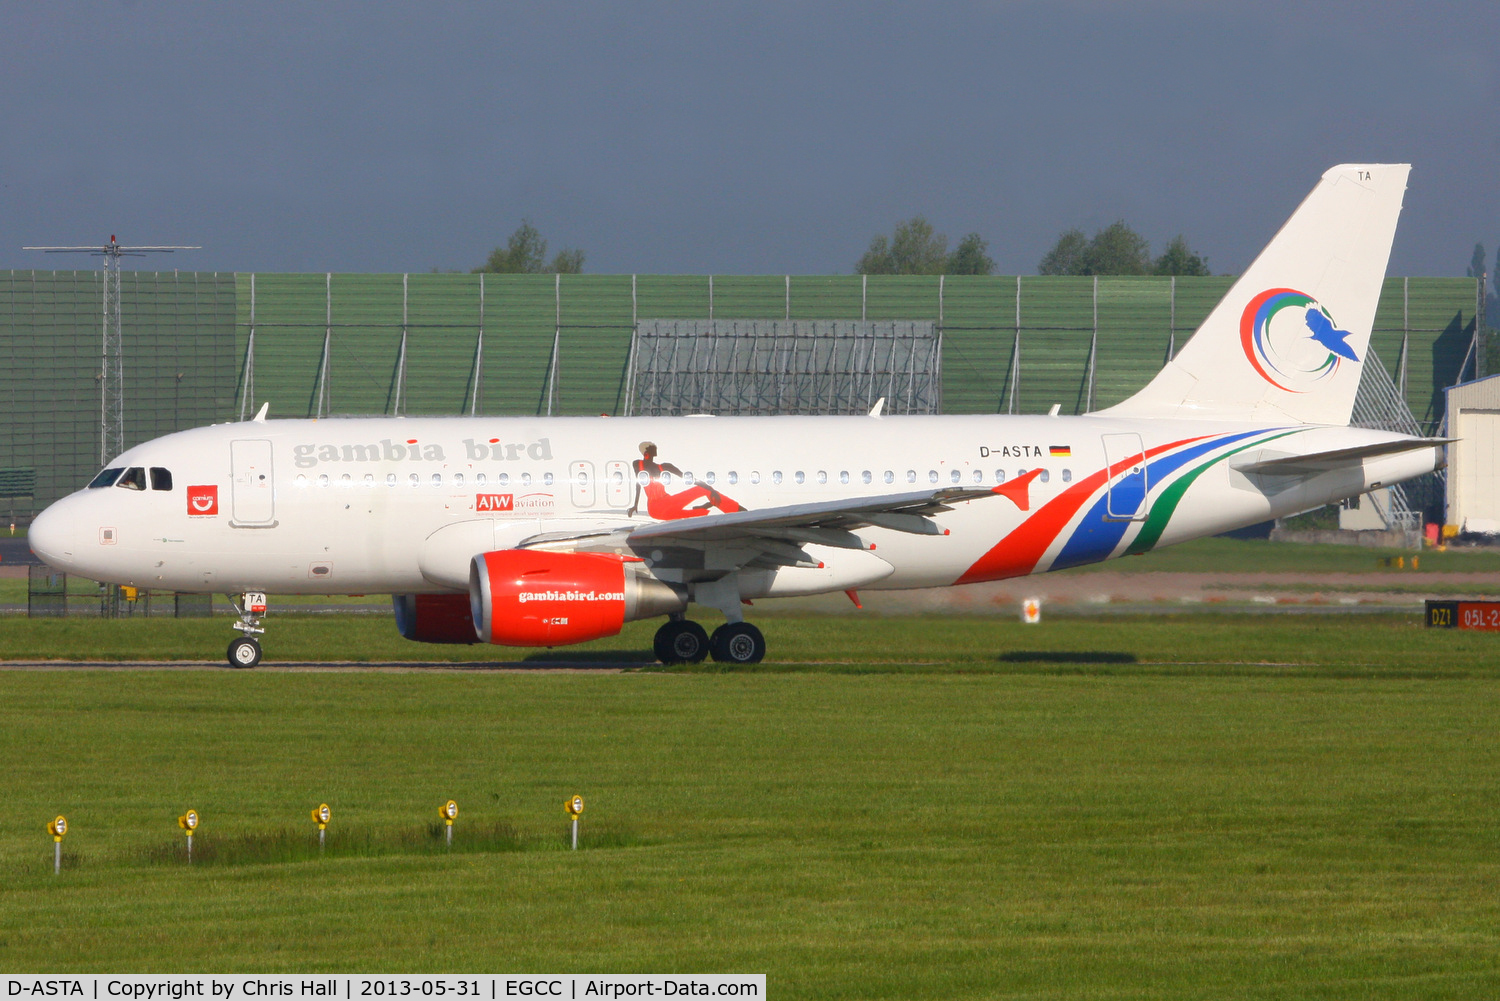 D-ASTA, 2011 Airbus A319-112 C/N 4663, Germania A319 in Gambia Bird livery